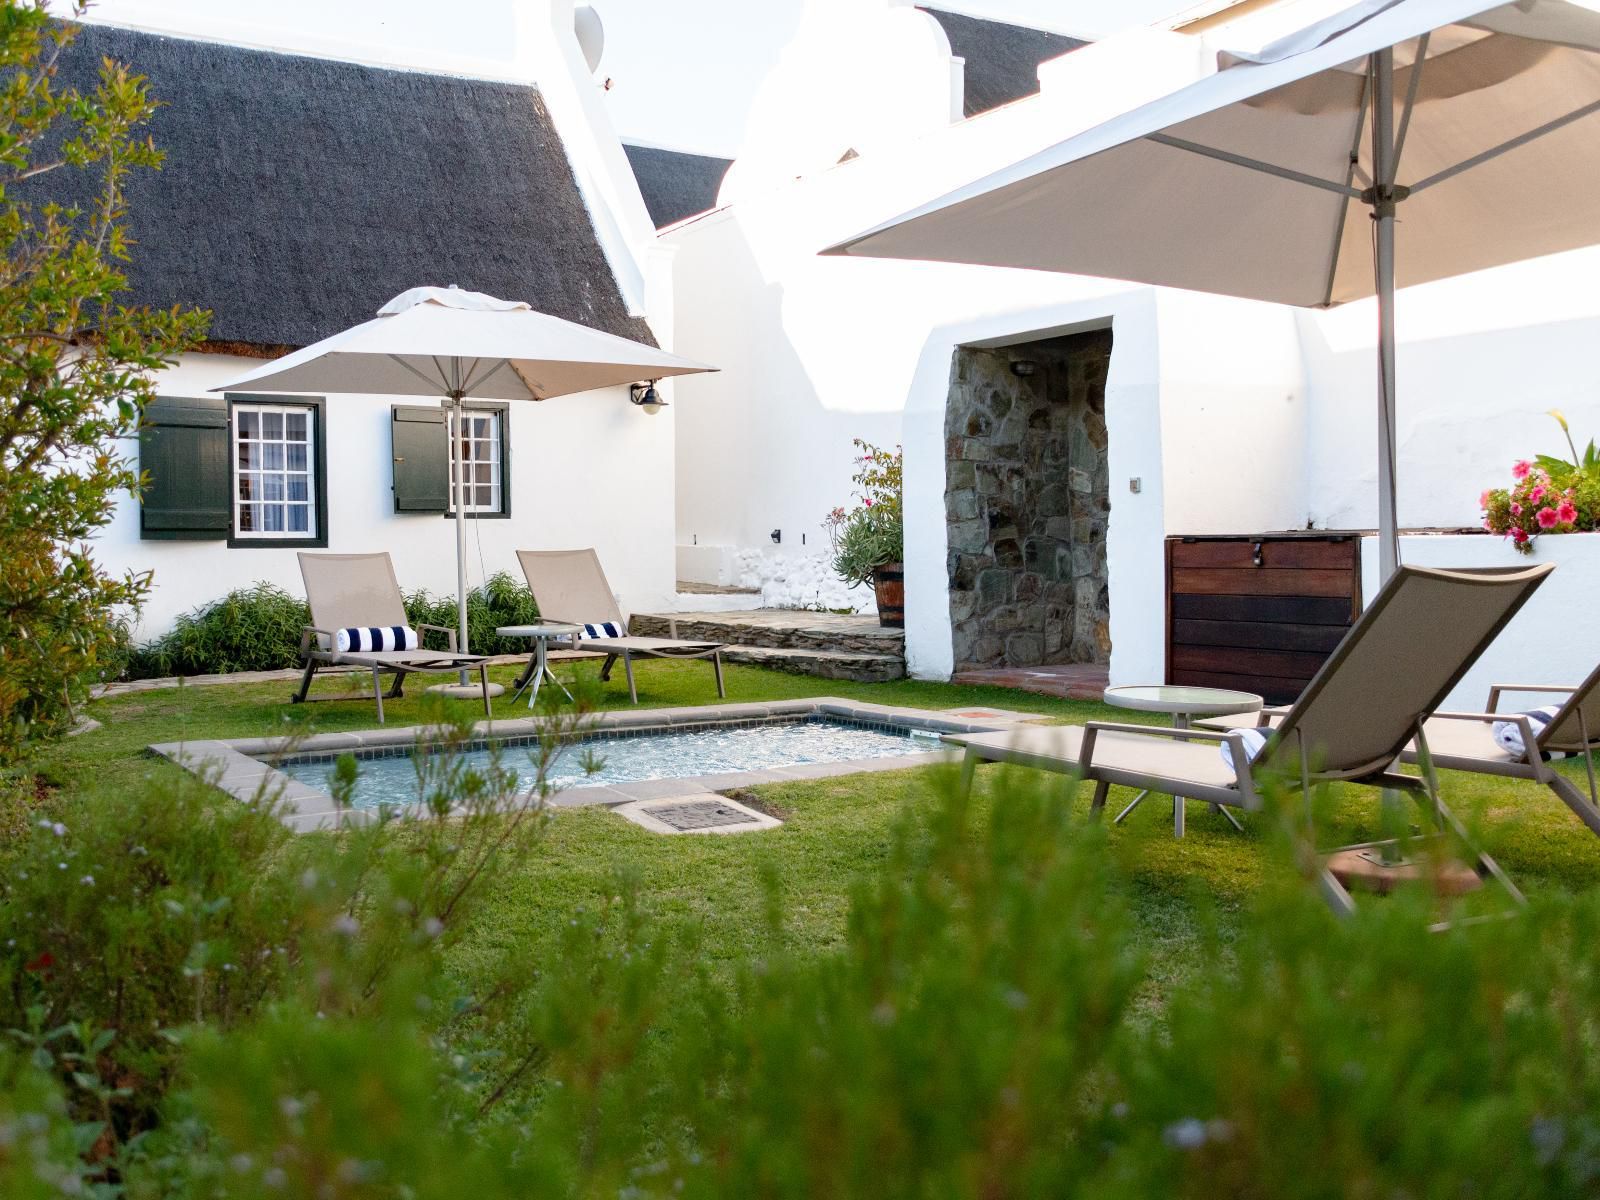 Tulbagh Boutique Heritage Hotel Tulbagh Western Cape South Africa House, Building, Architecture